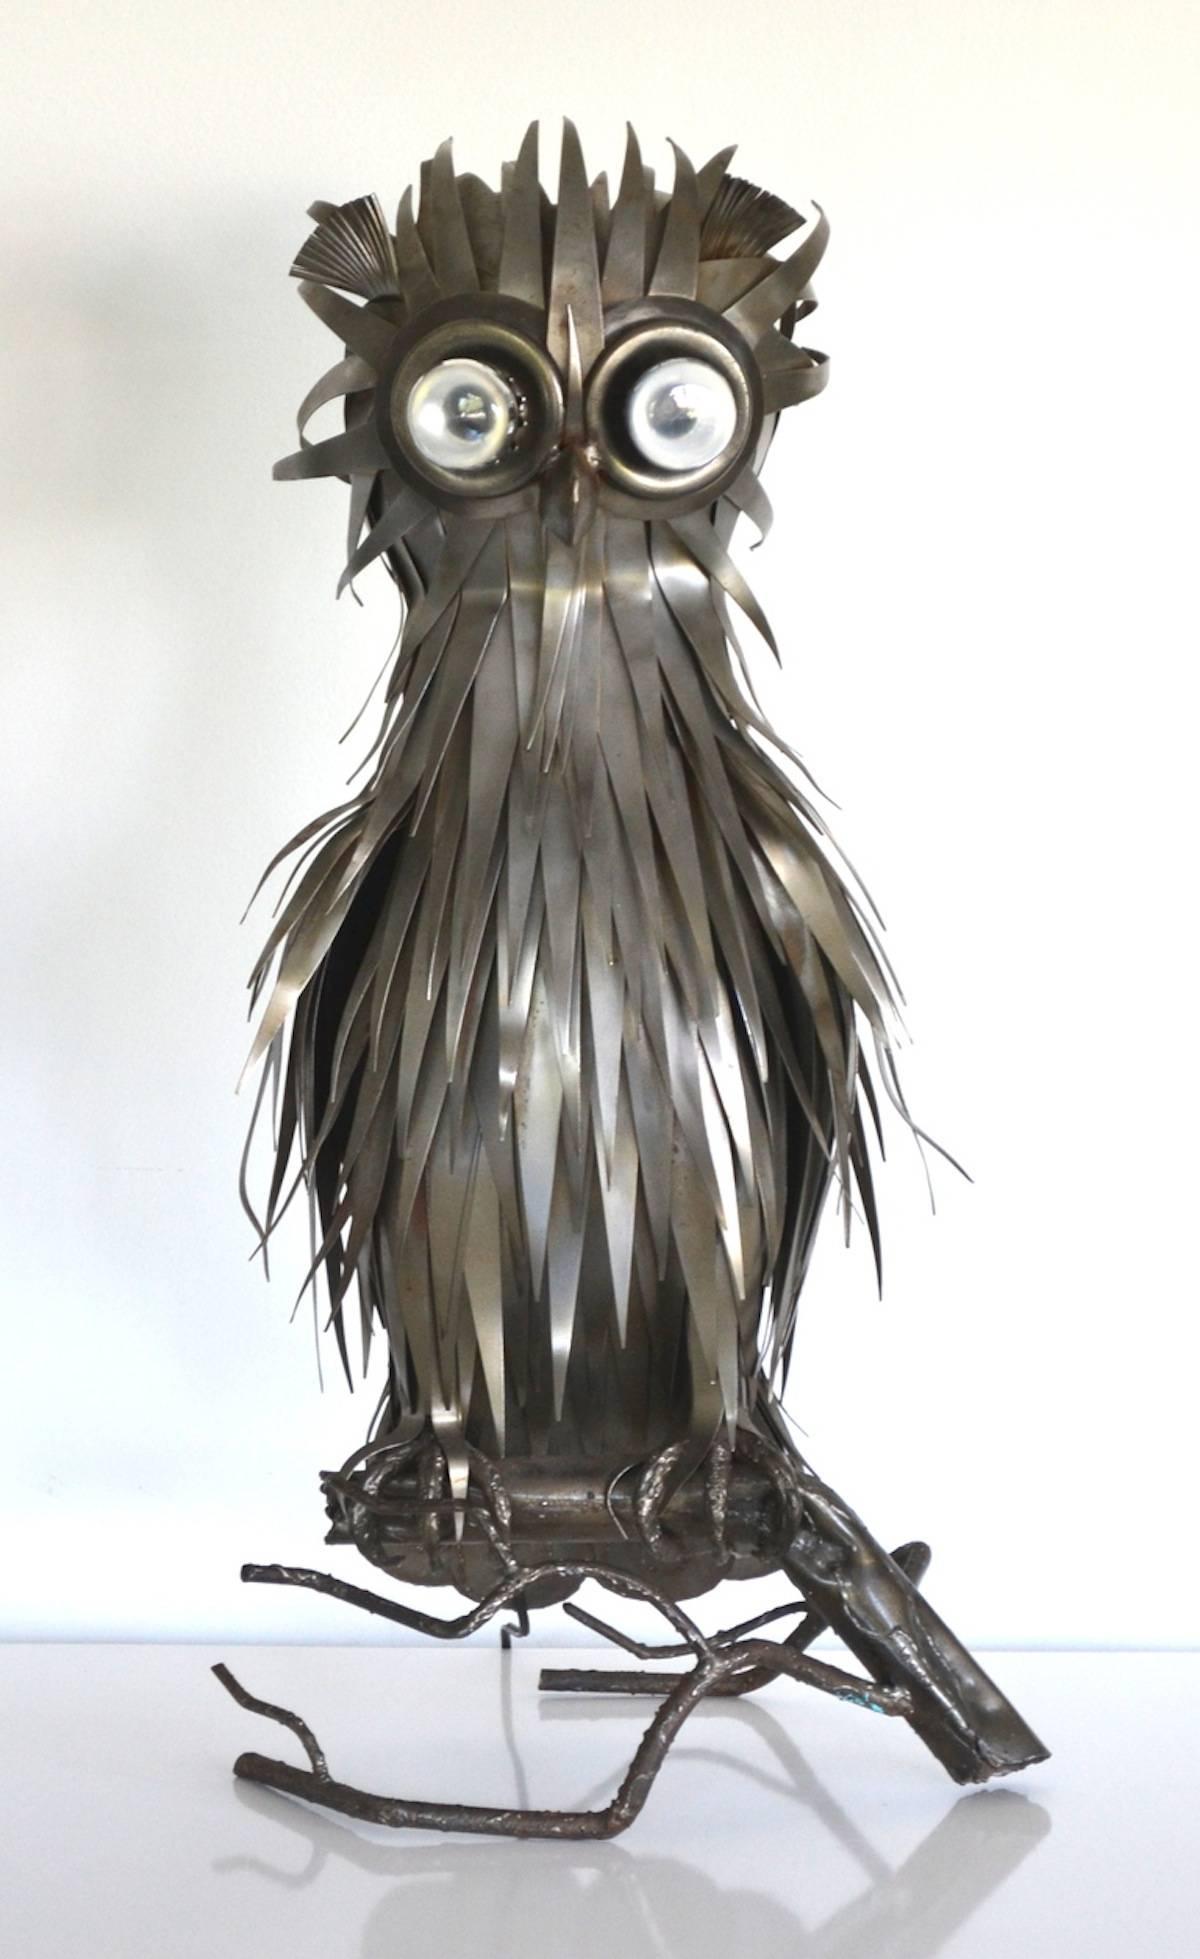 Sculptural midcentury Brutalist artisan crafted torch cut owl form table lamp by Michel Jarry, circa 1960s-1970s. This French Industrial lamp of hand-cut metal features two light sockets as eyes.